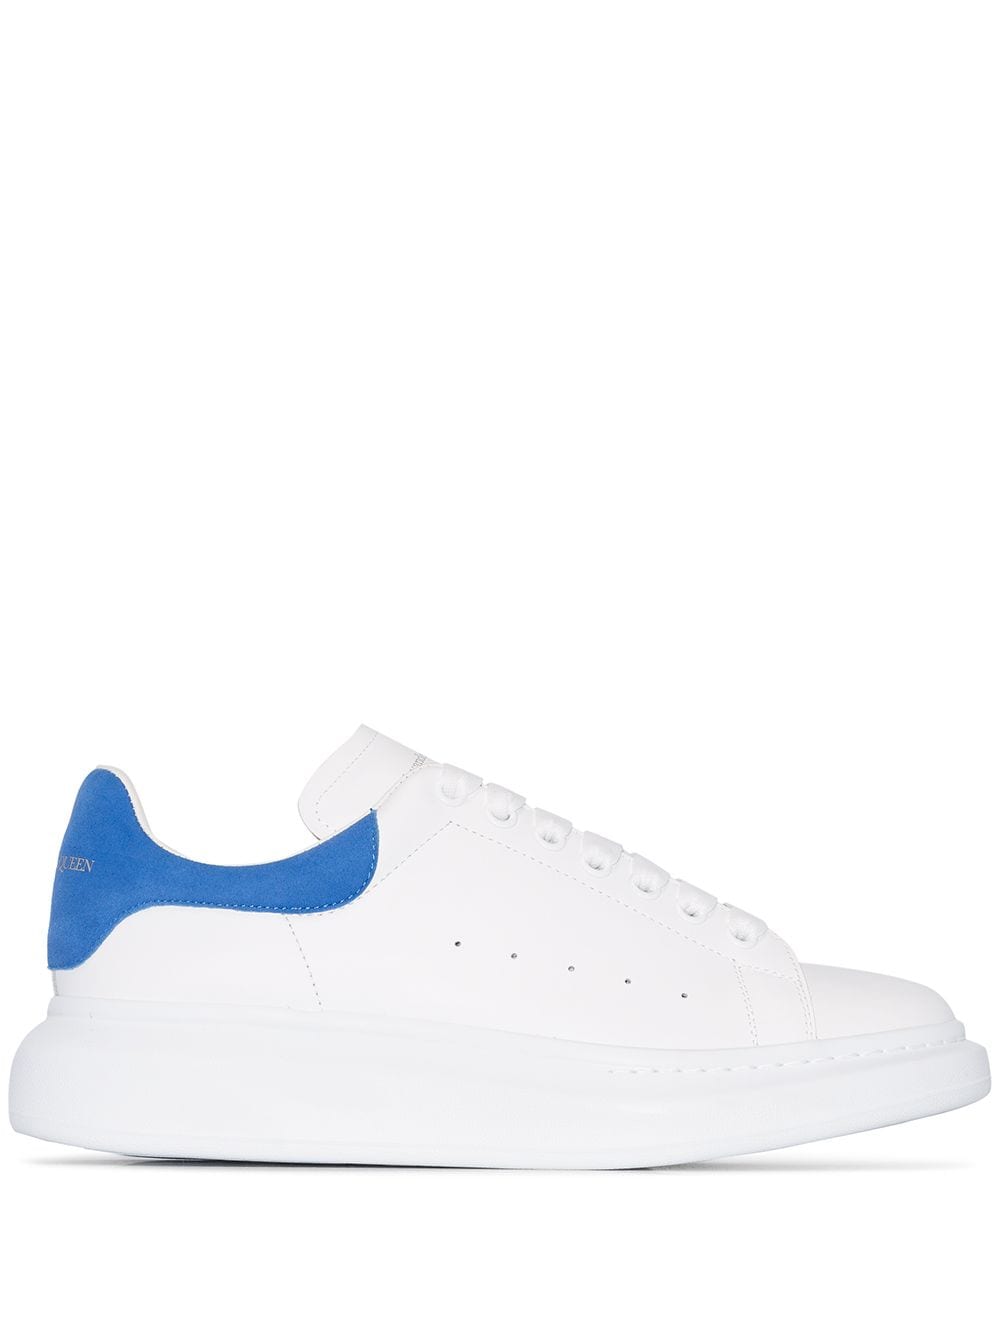 ALEXANDER MCQUEEN White Leather High Top Sneakers for Men - Chunky Sole, Suede Insert, Round Toe